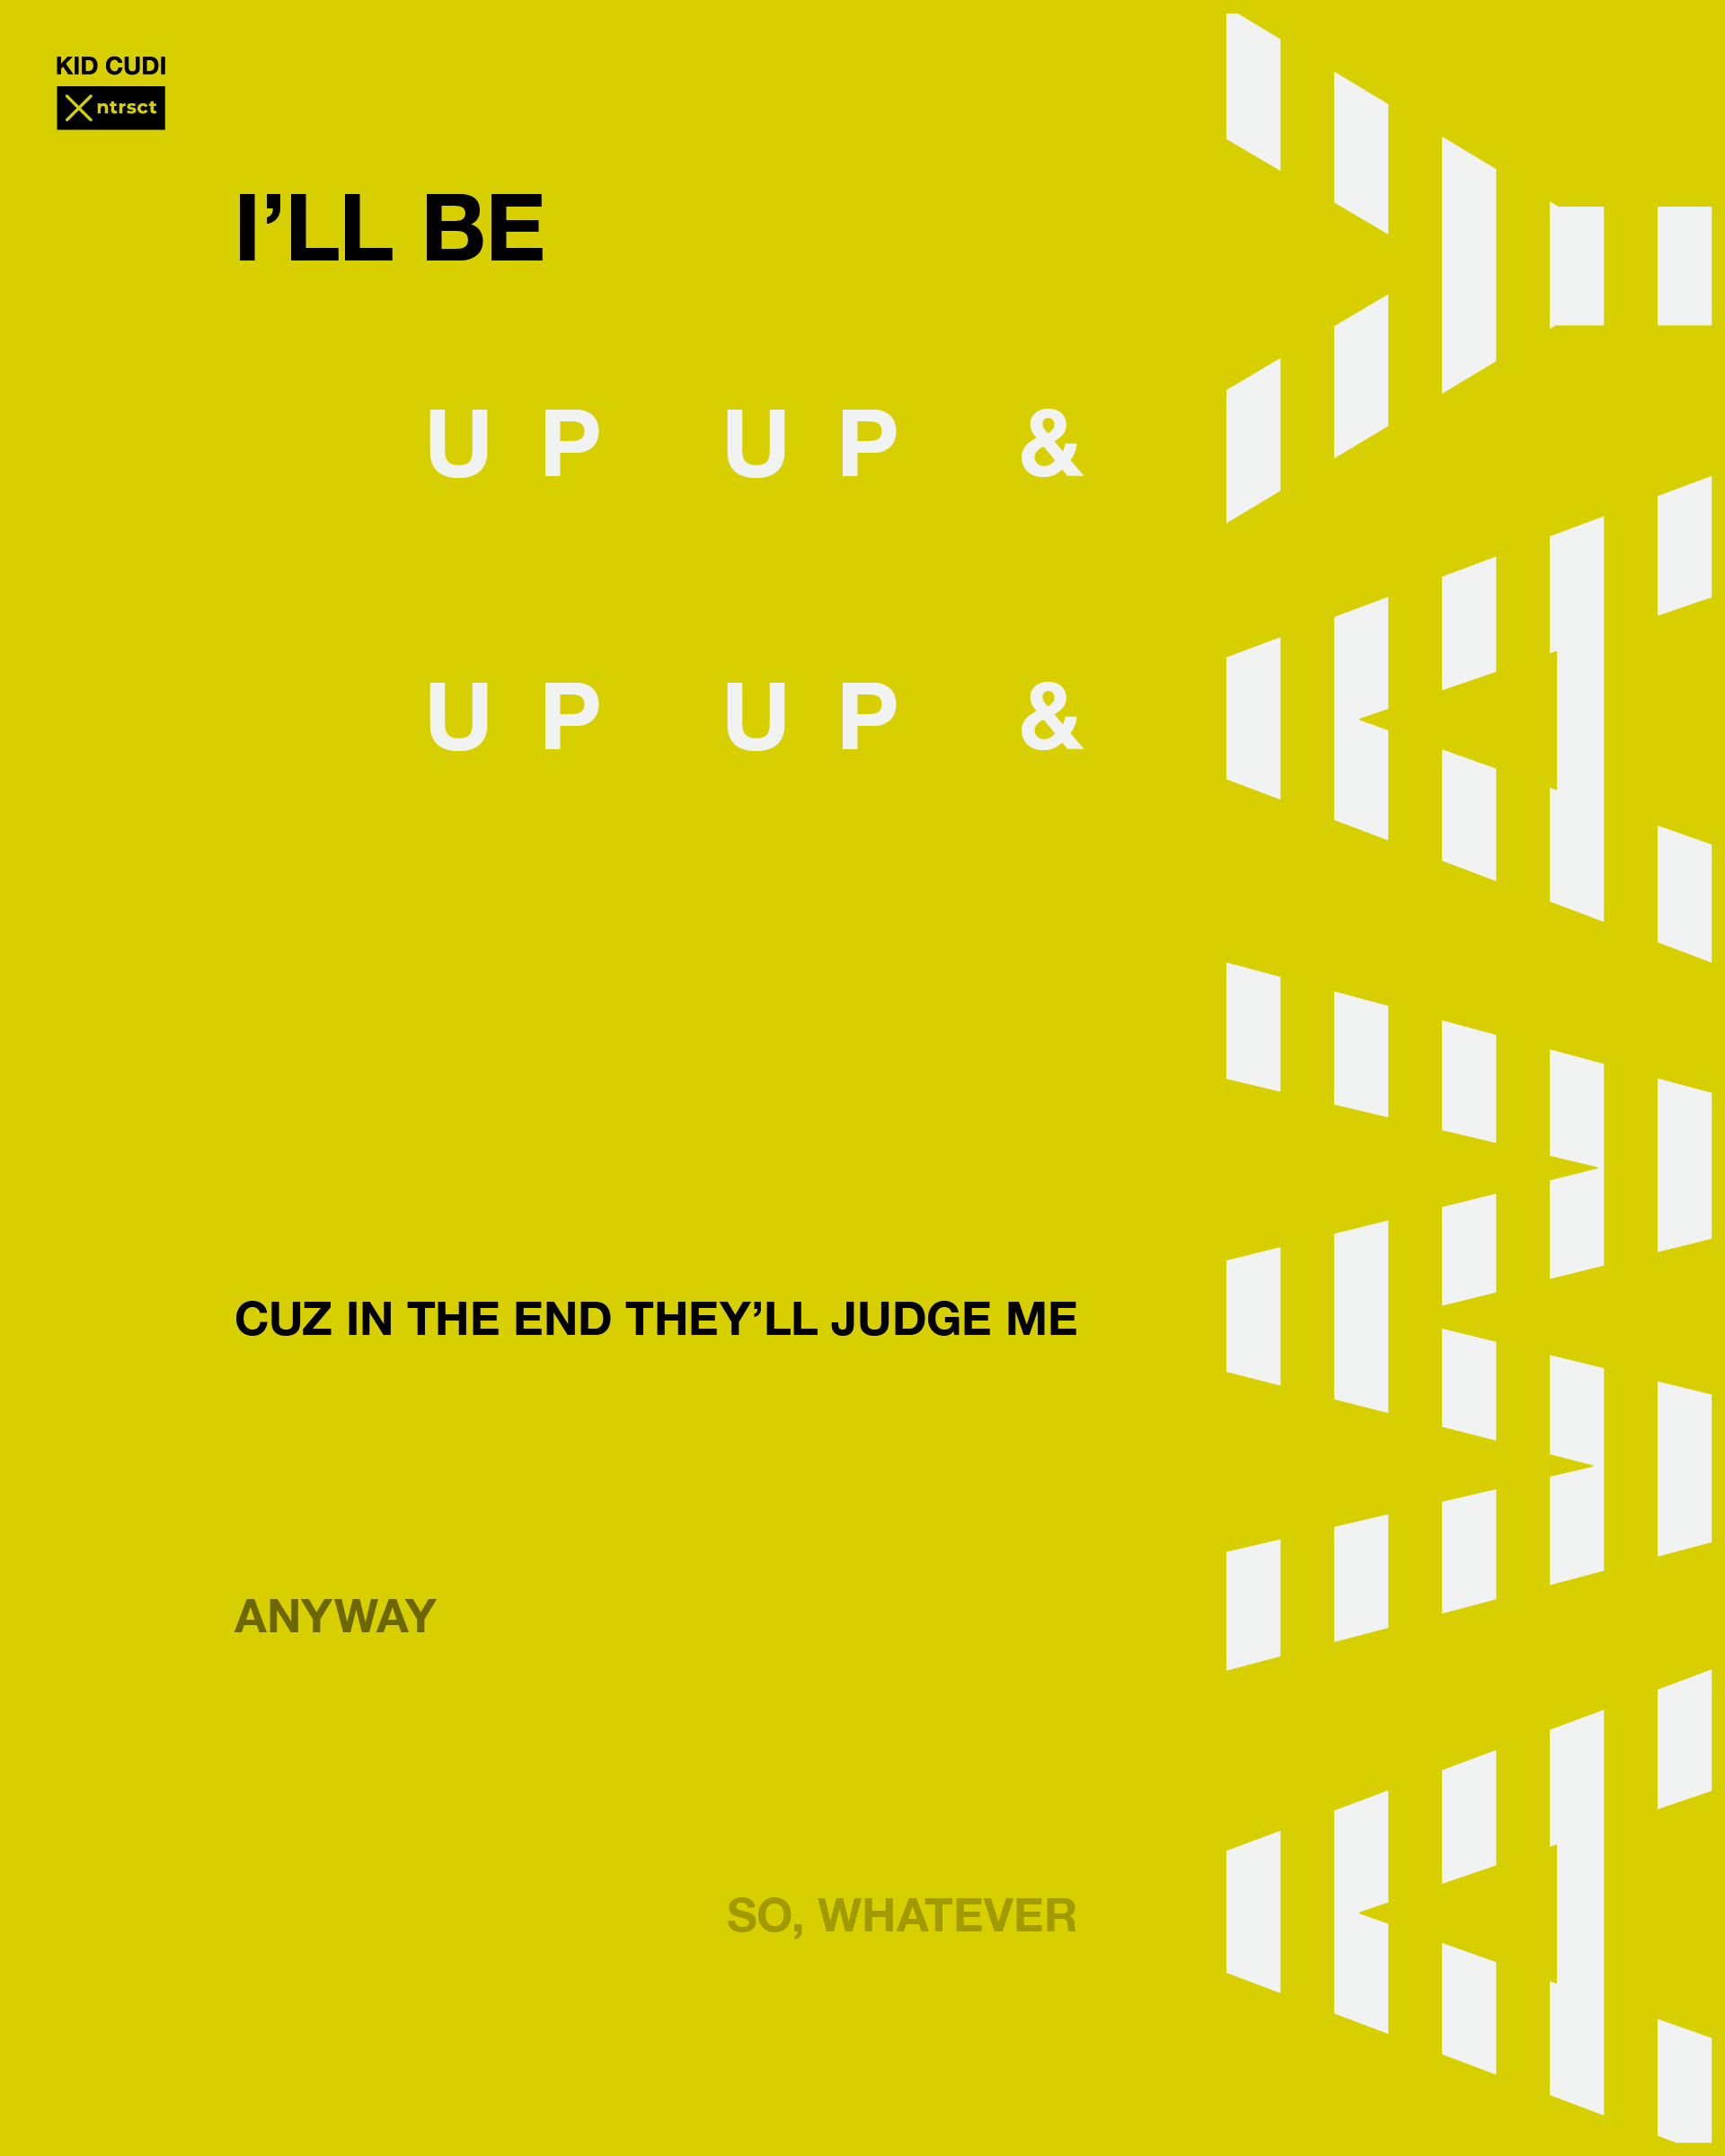 The poster I made using lyrics from the song ”Up Up & Away” by Kid Cudi